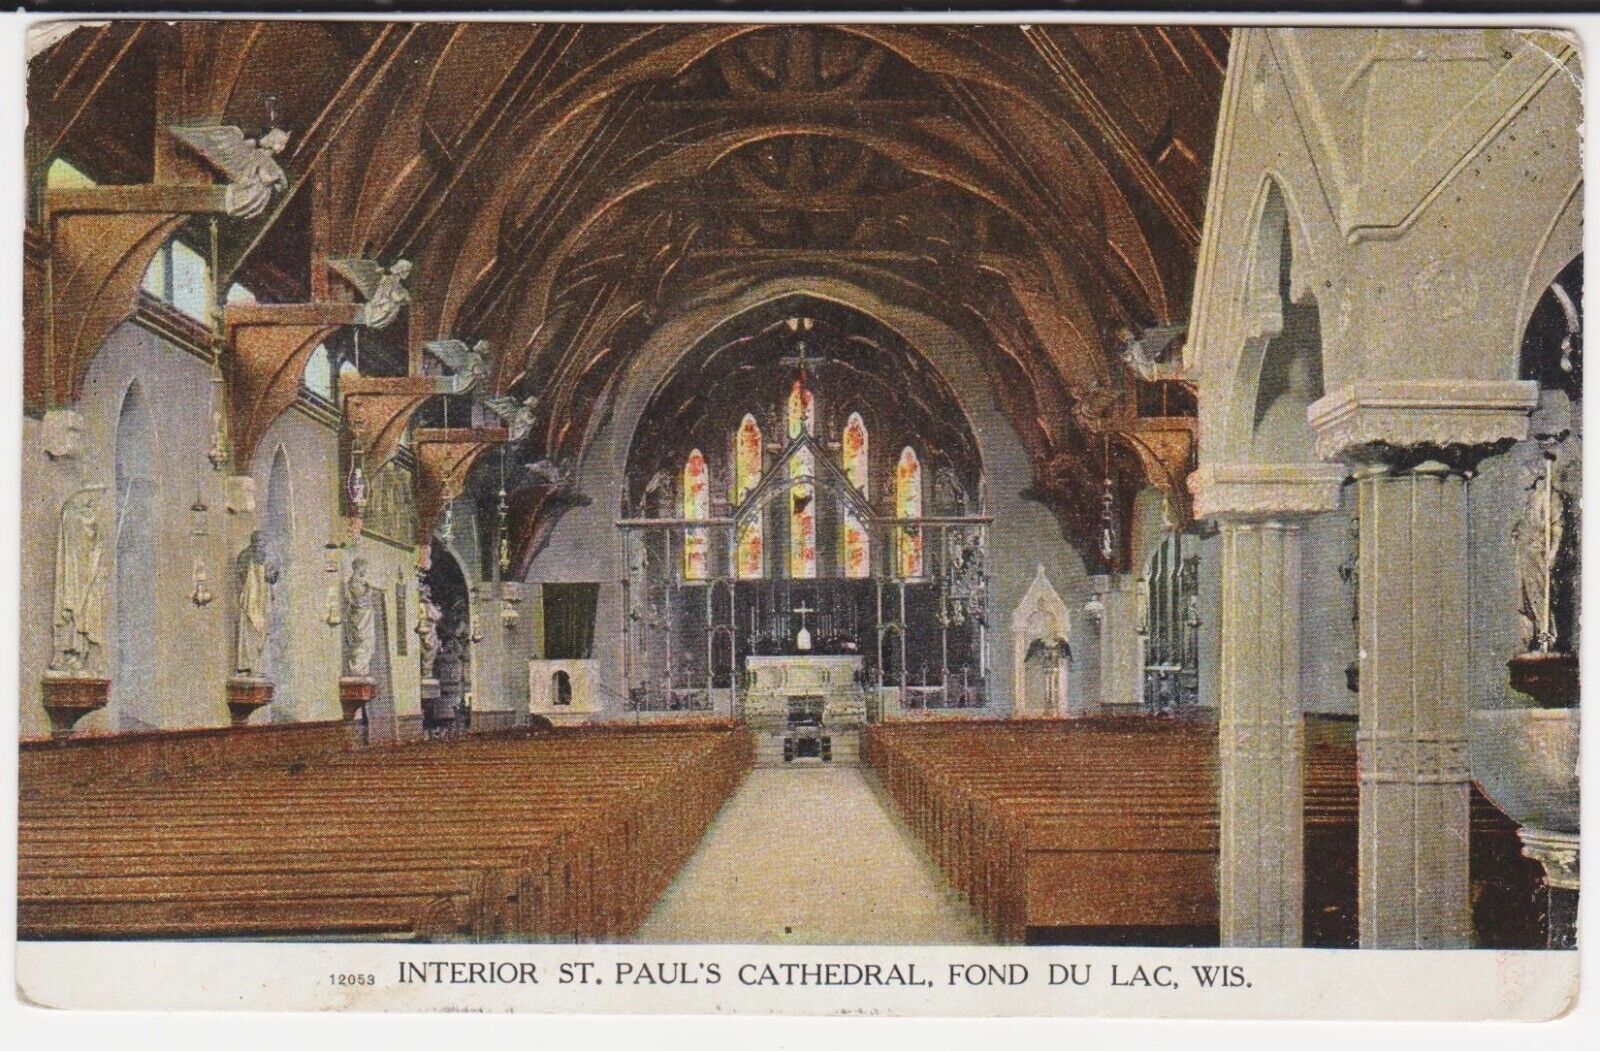 ST. PAUL’S CATHEDRAL, FOND DU LAC, WIS. - INTERIOR – Posted 1911 Postcard